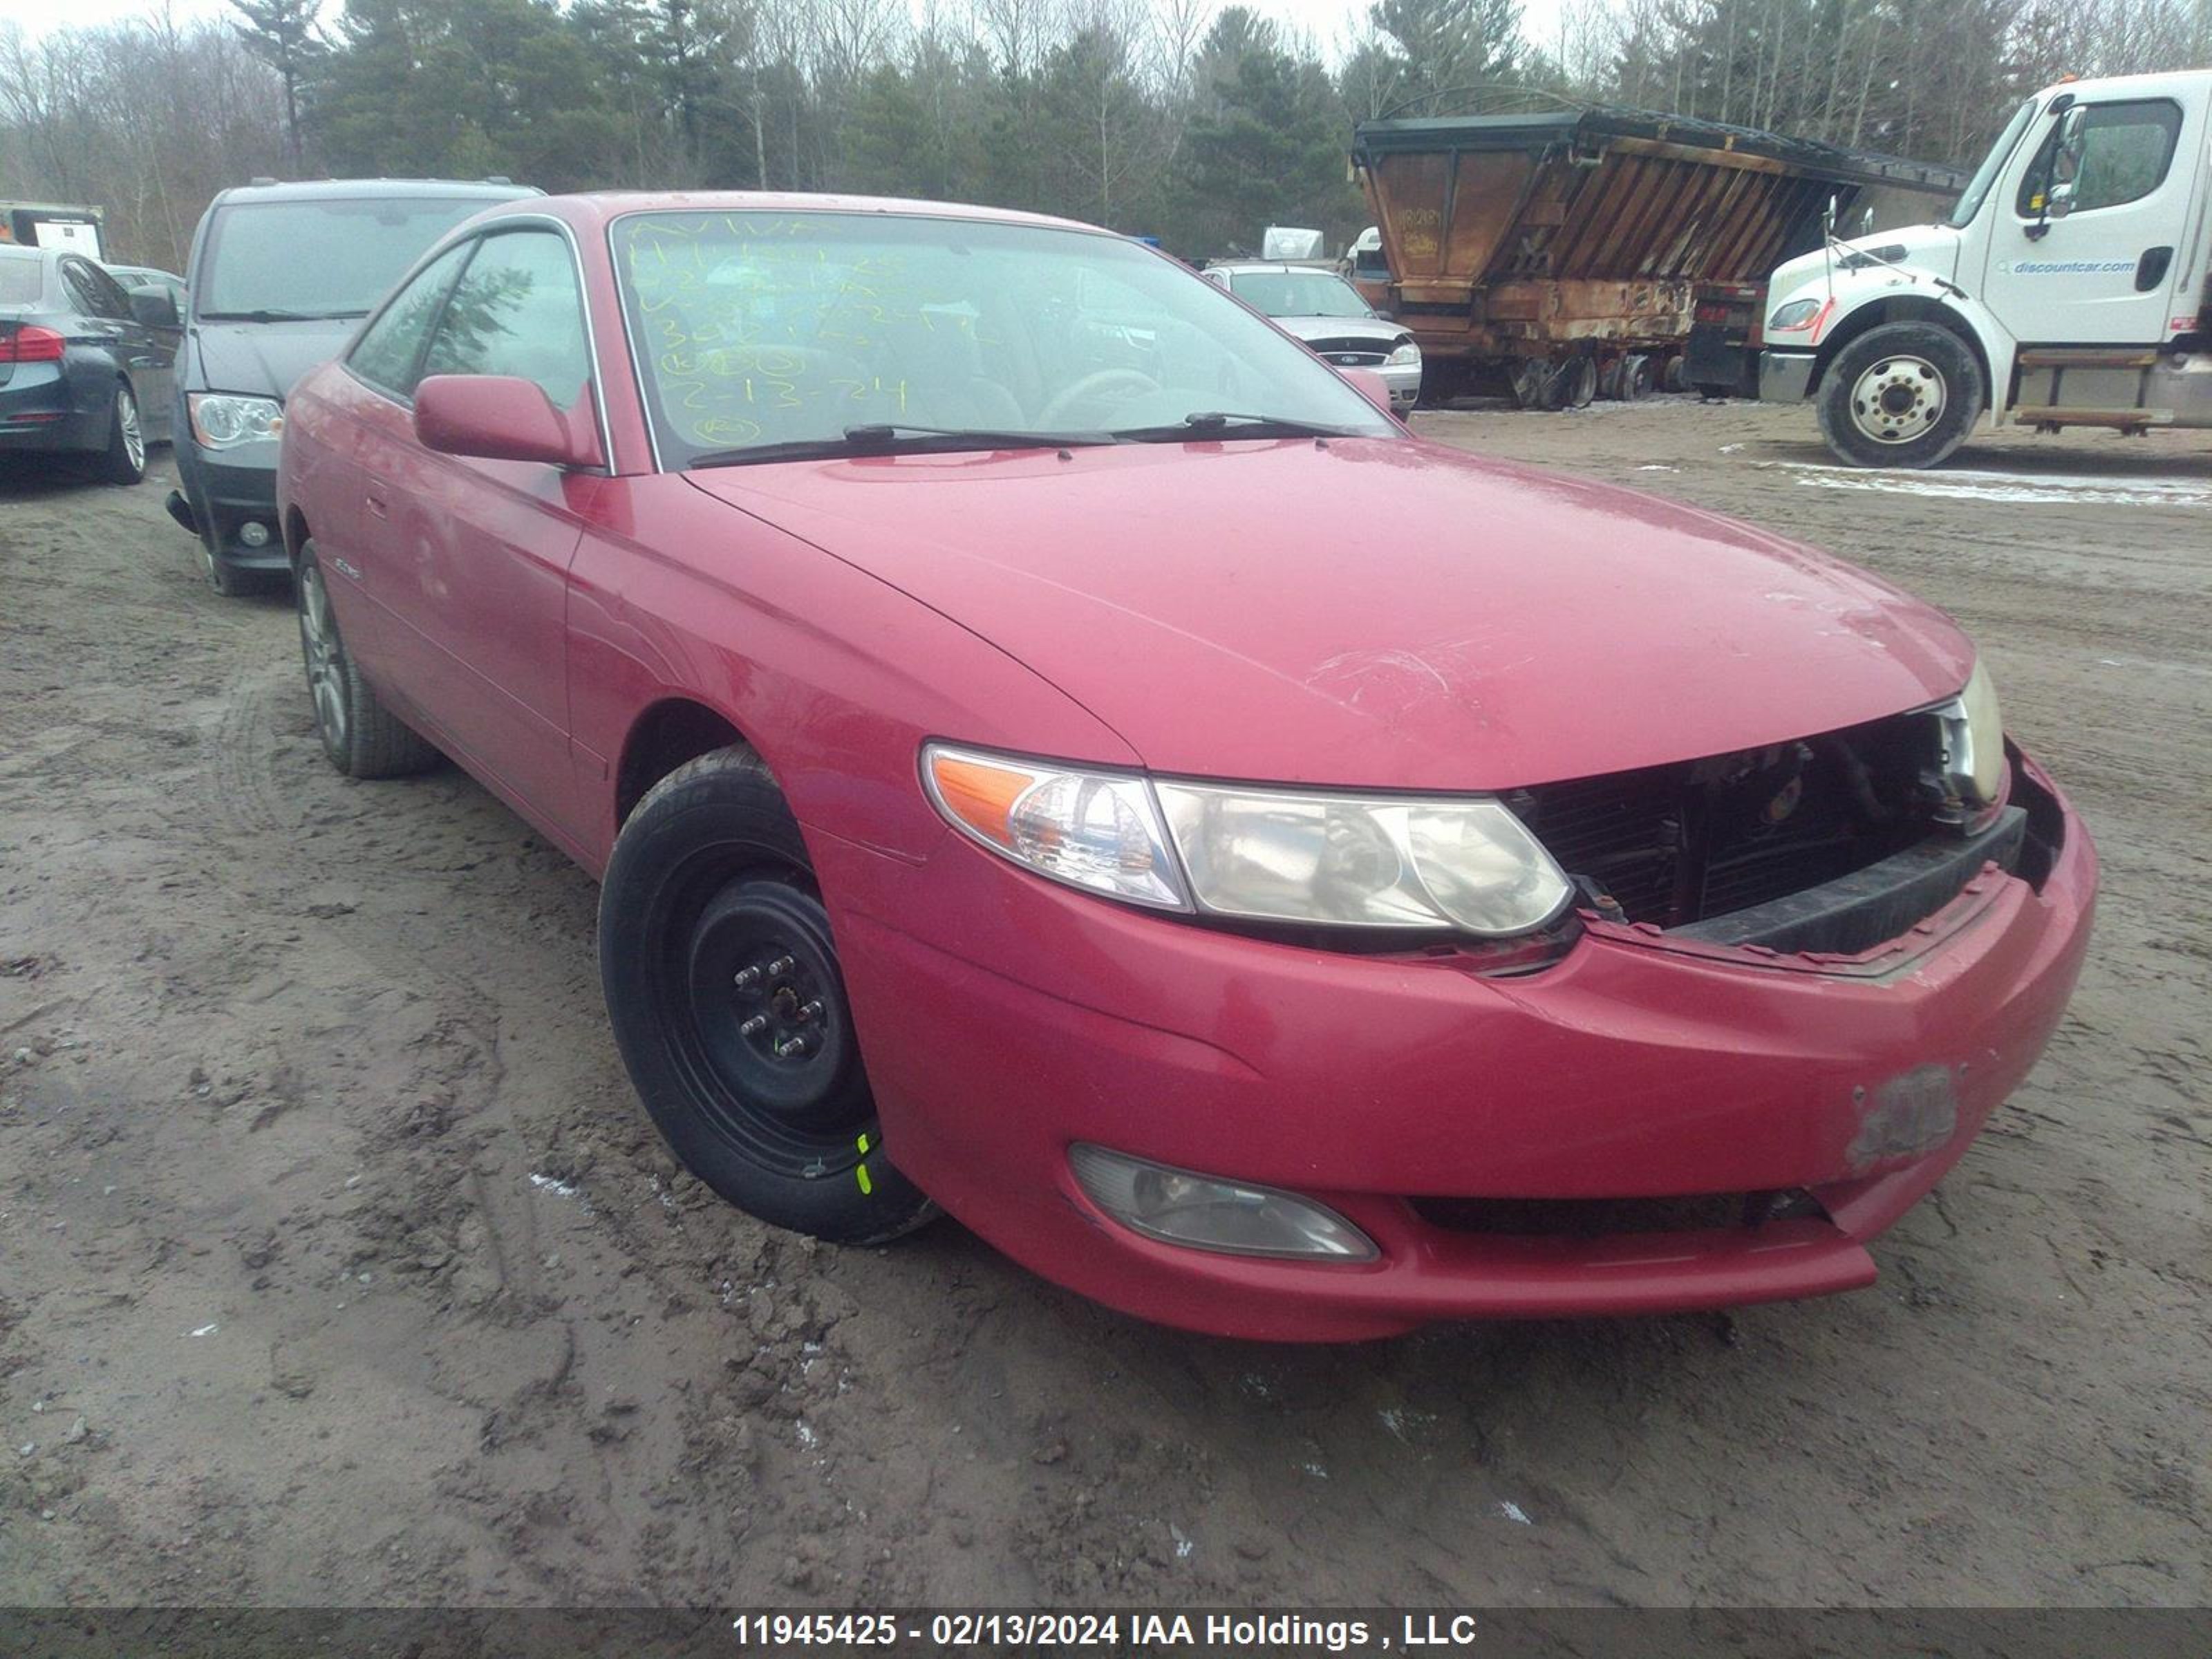 vin: 2T1CF28P82C870242 2T1CF28P82C870242 2002 toyota camry solara 3000 for Sale in l4a7x4, 16505 Hwy 48 , Stouffville, Ontario, USA